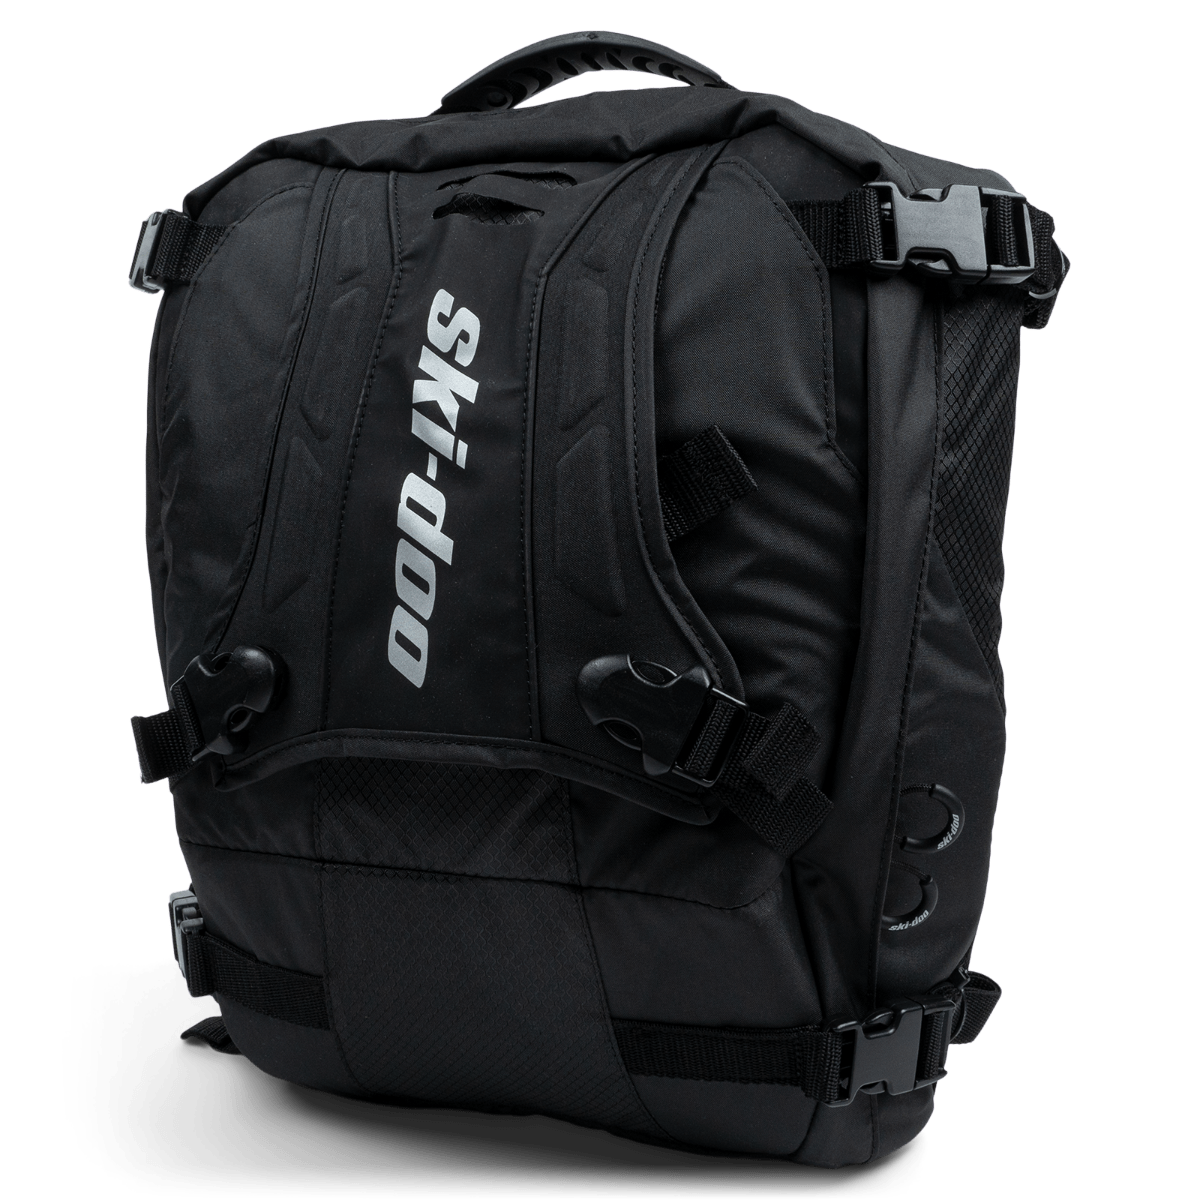 Slim Tunnel Bag with soft straps - 15 L